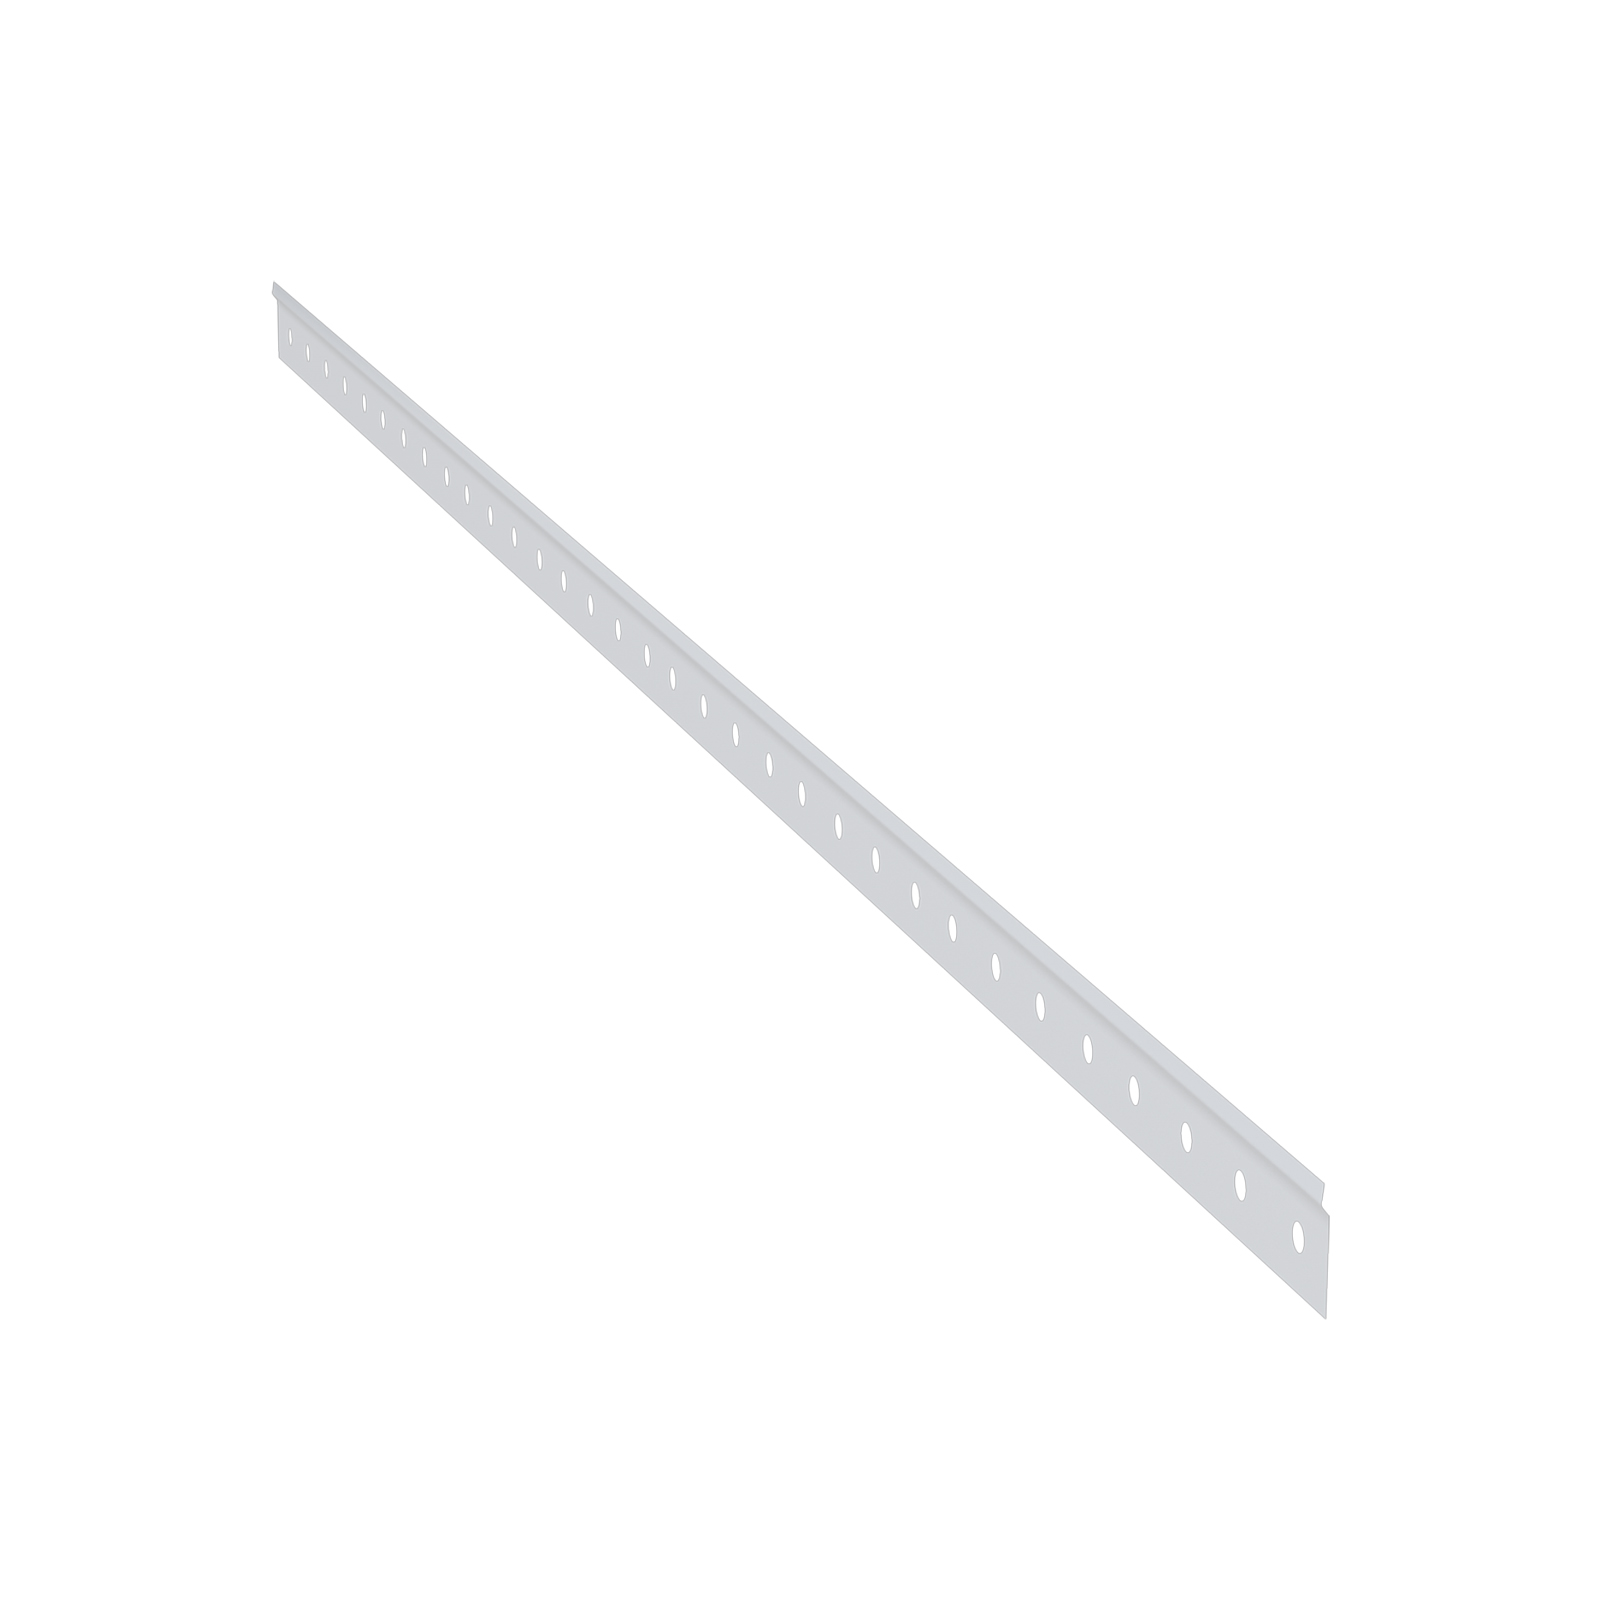 Home Solutions Hang Track White 667mm